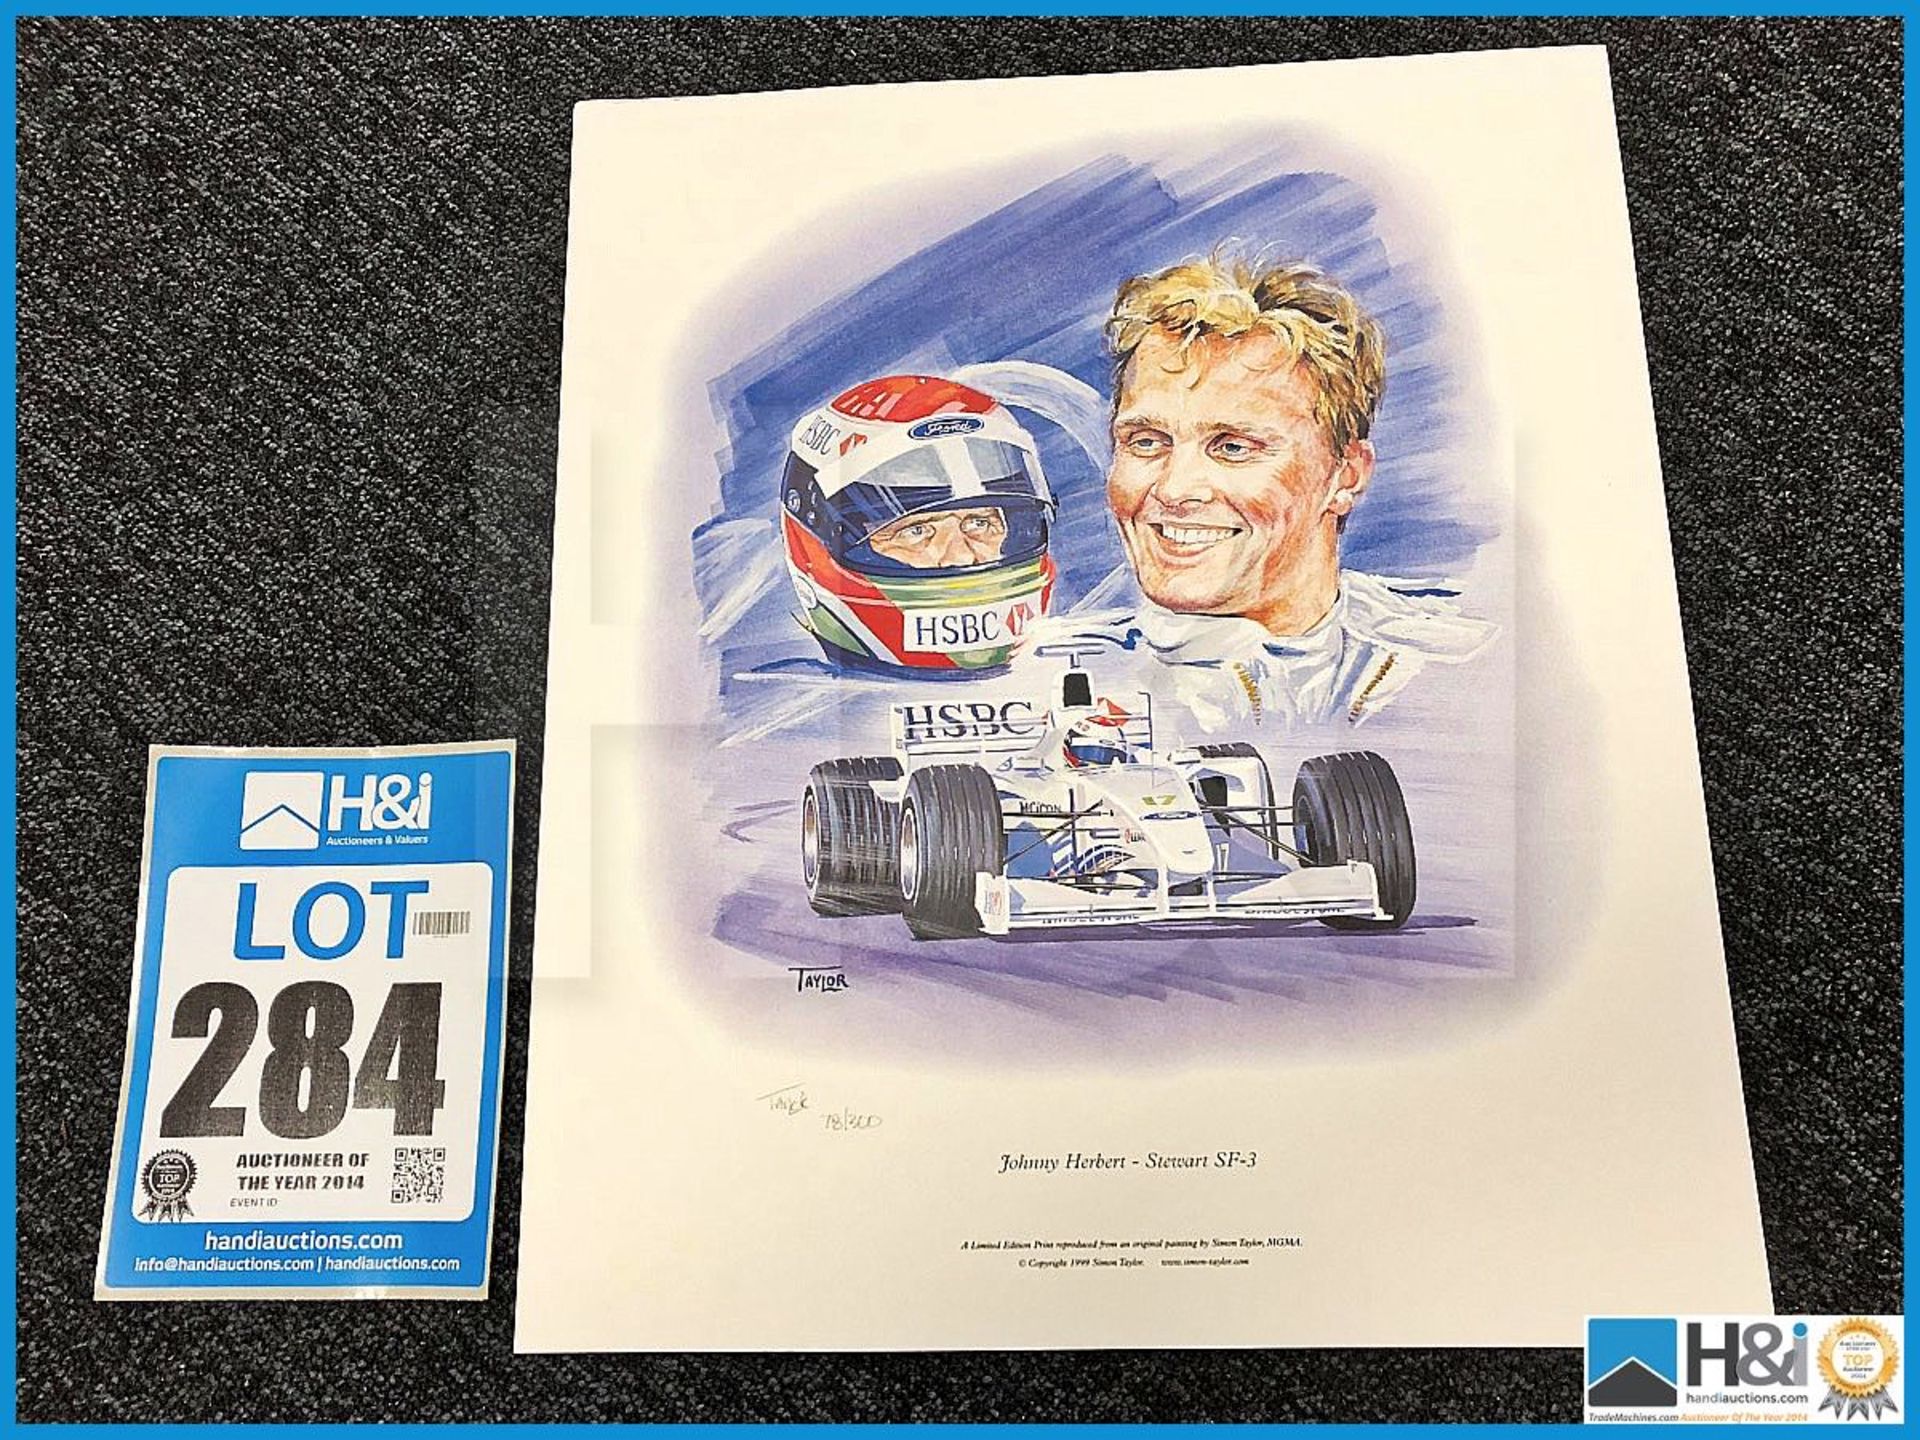 Limited edition print of Johnny Herbert - Stewart SF-3 by Simon Taylor. Edition 78 of 300. Ex-Coswor